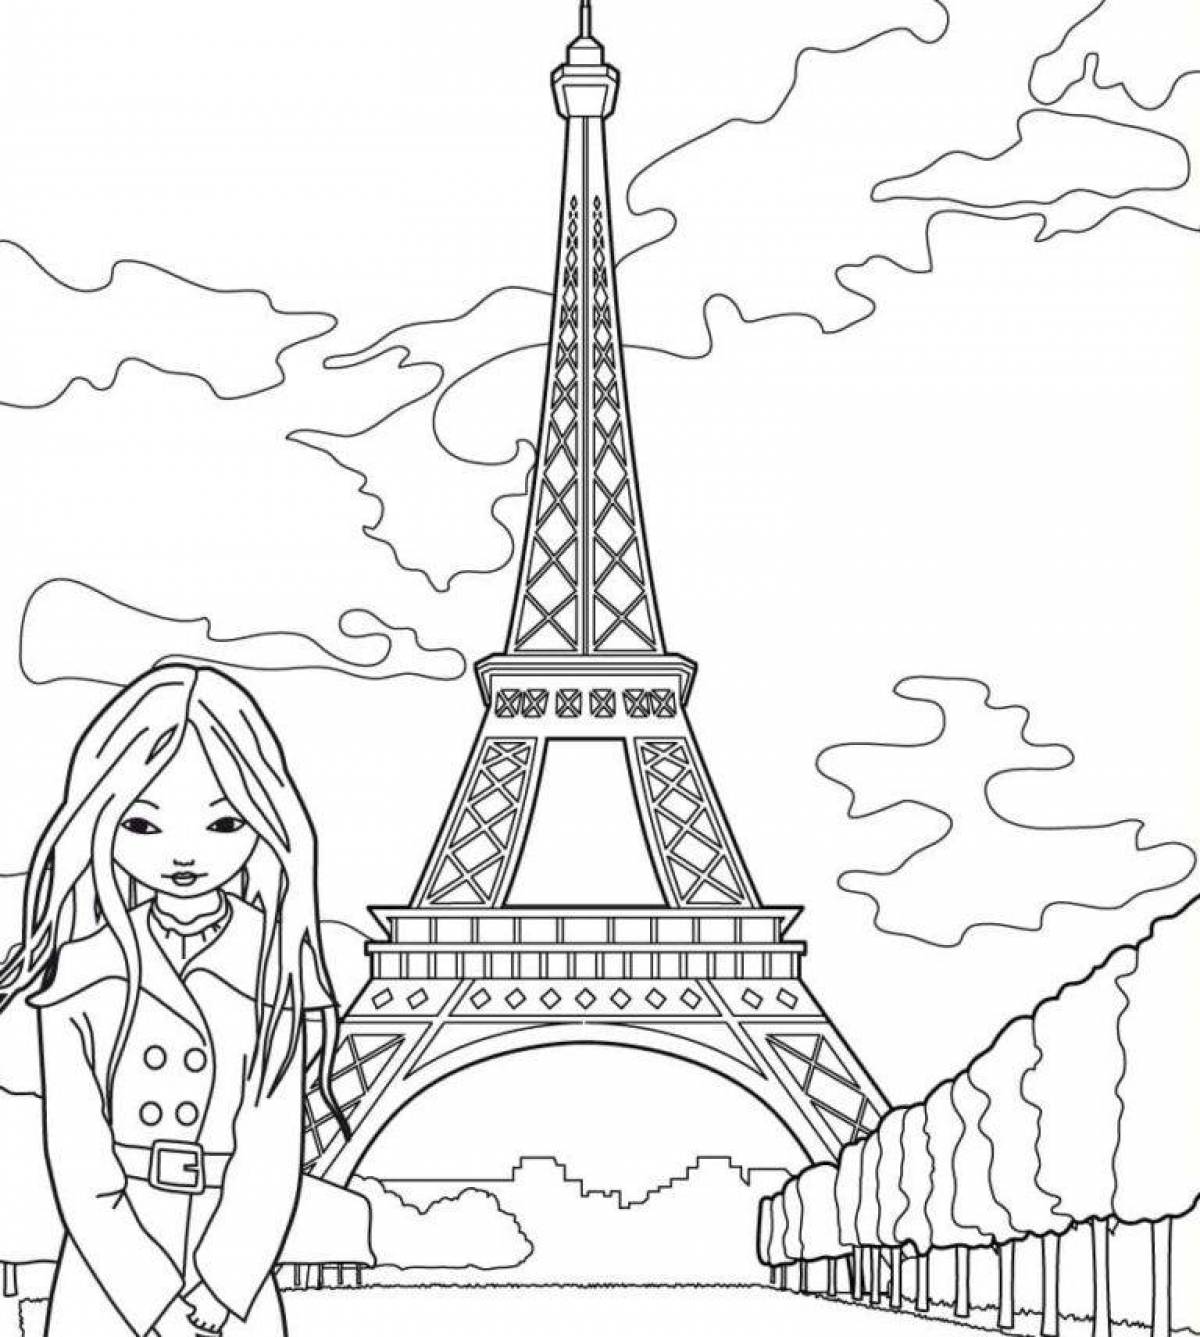 Coloring book shining eiffel tower